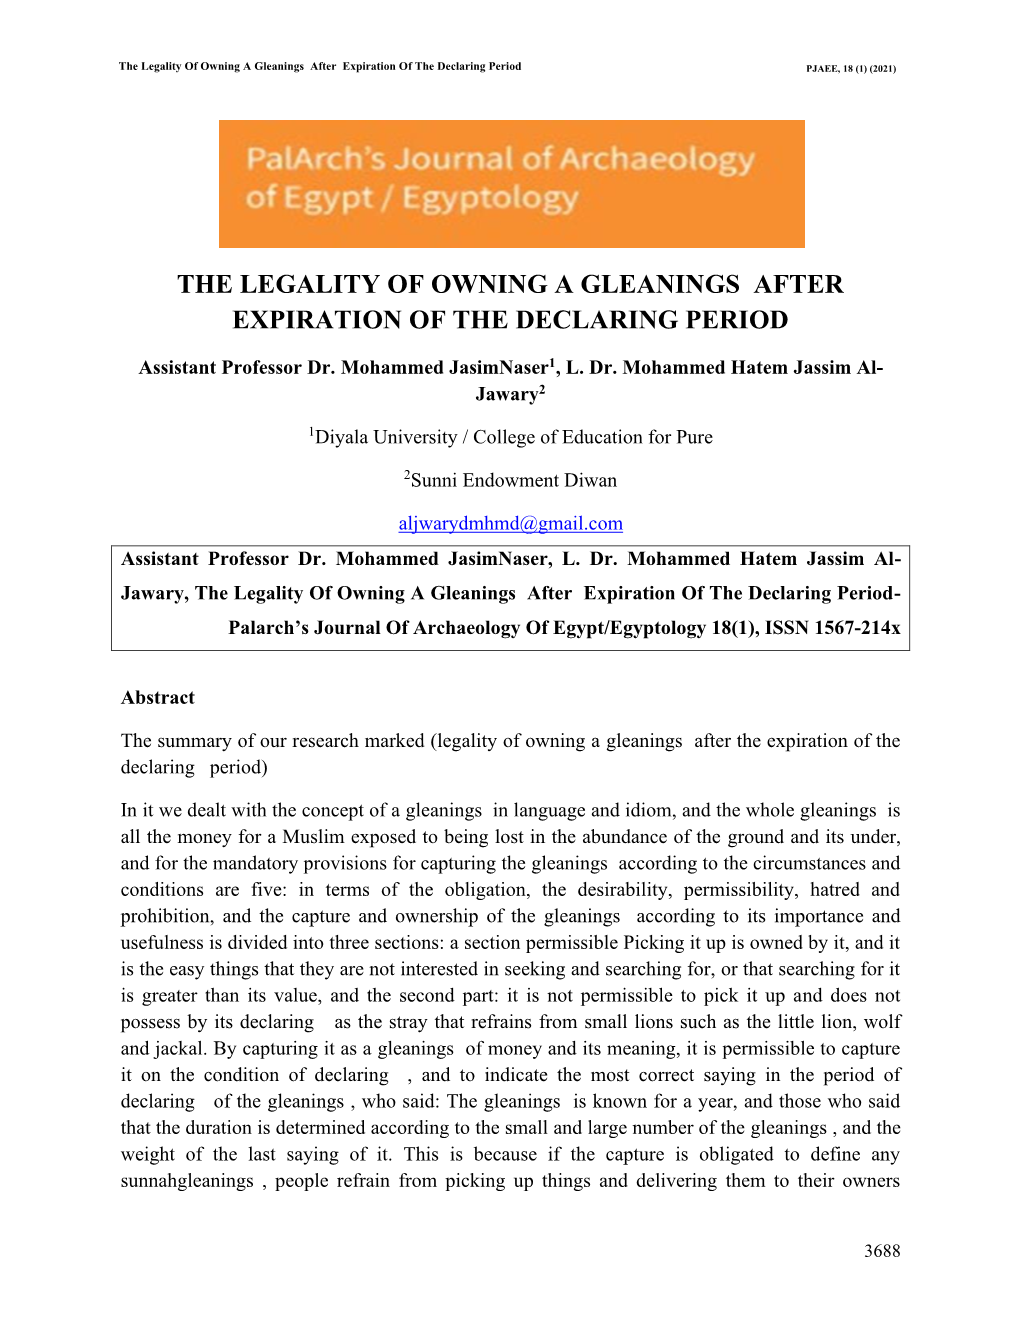 The Legality of Owning a Gleanings After Expiration of the Declaring Period PJAEE, 18 (1) (2021)